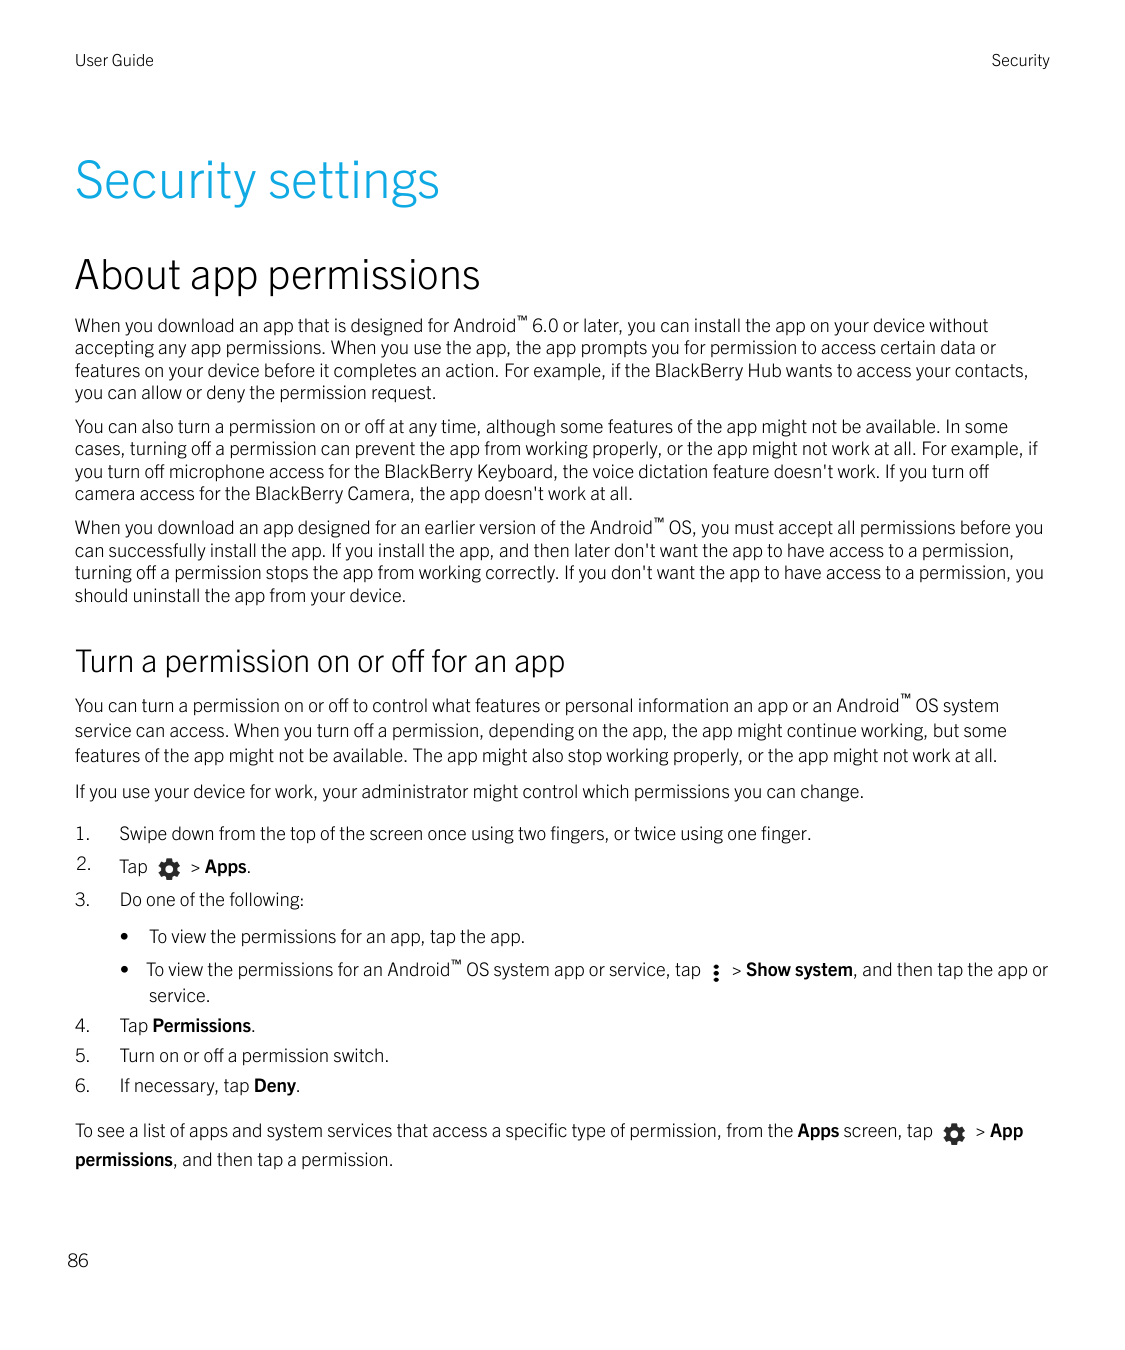 User GuideSecuritySecurity settingsAbout app permissionsWhen you download an app that is designed for Android™ 6.0 or later, you